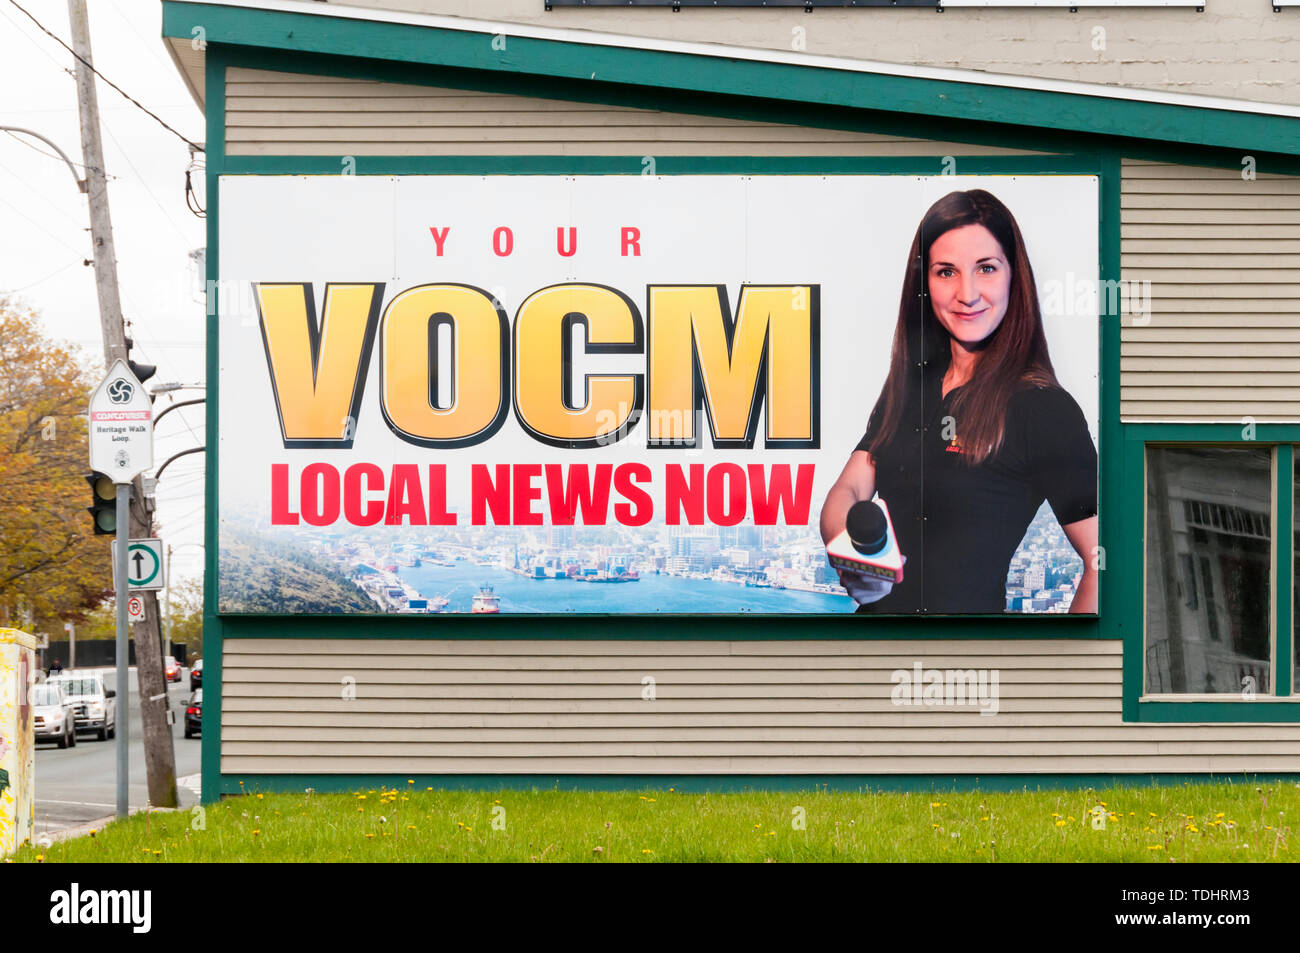 VOCM is a local radio station in St John's, Newfoundland, Canada. Stock Photo